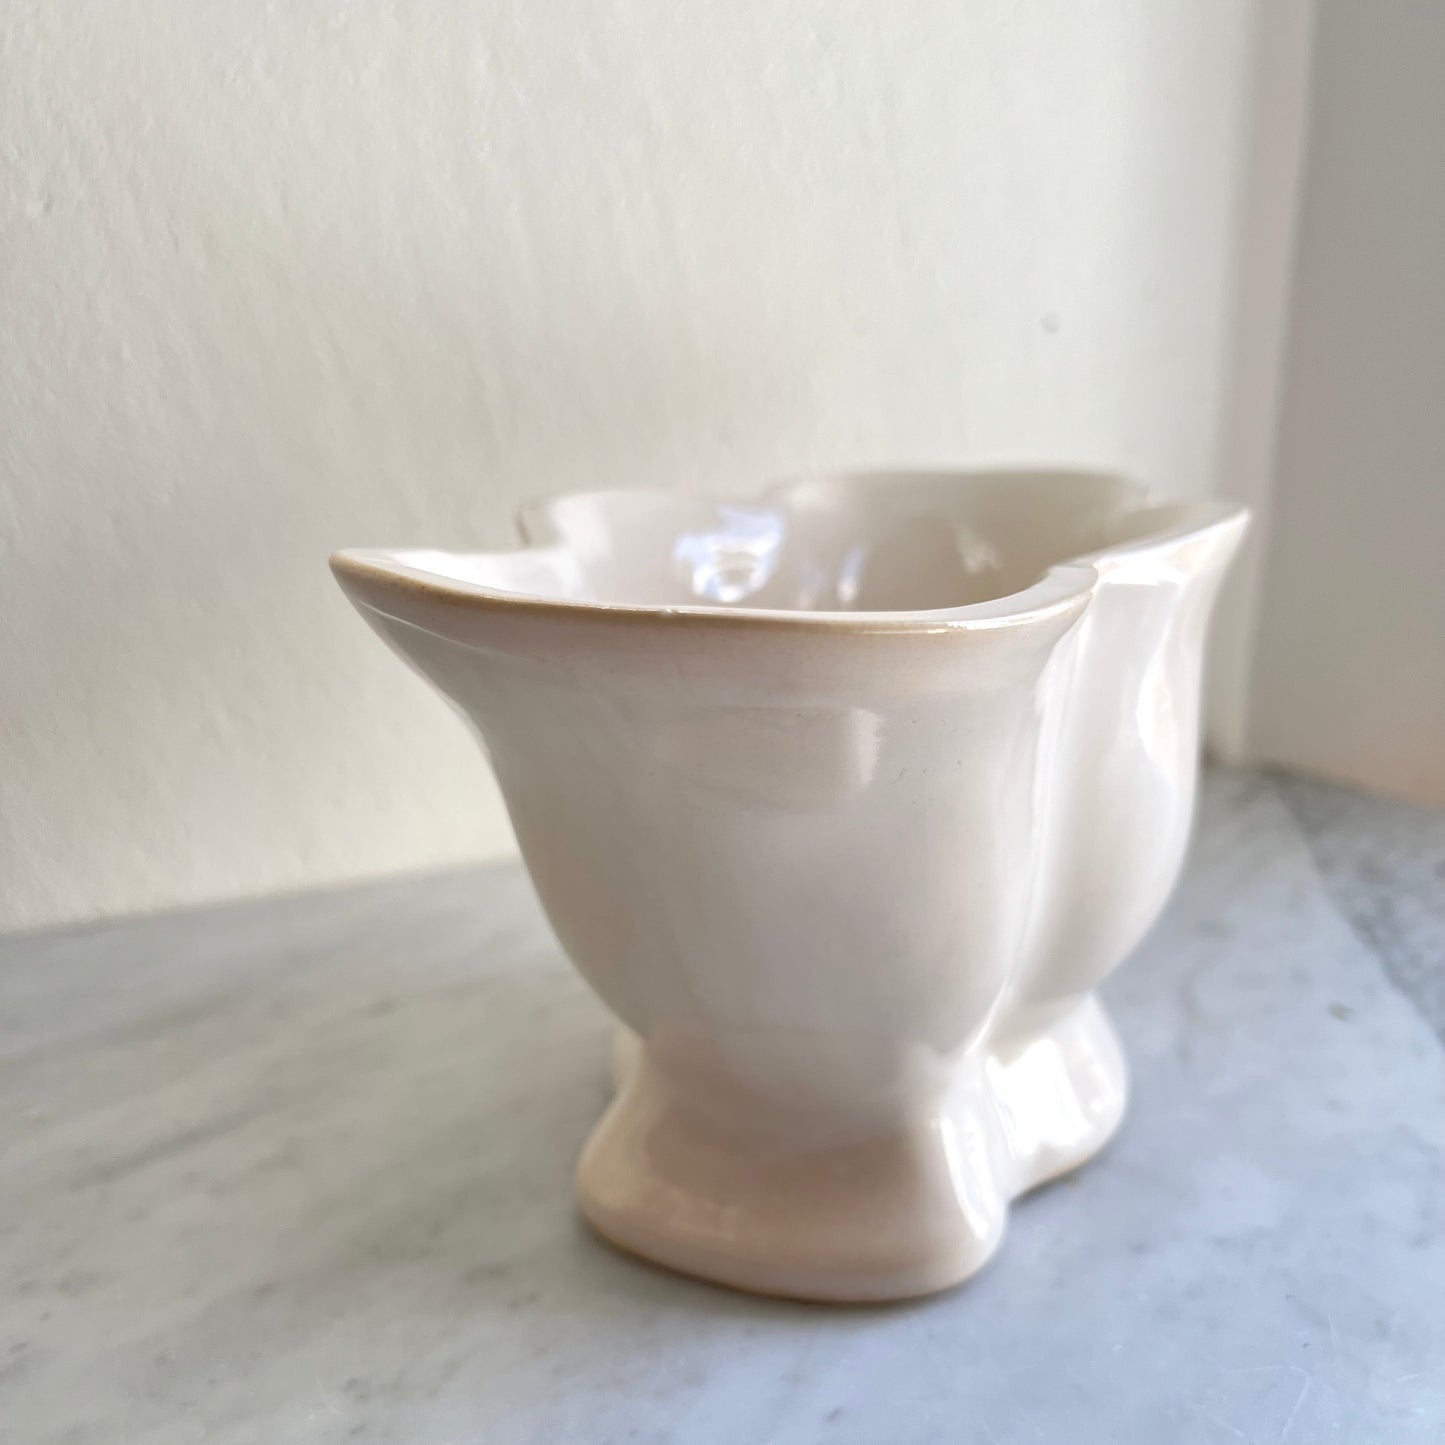 Fulham Pottery Charles West Art Deco Mantle Vase, Made in England